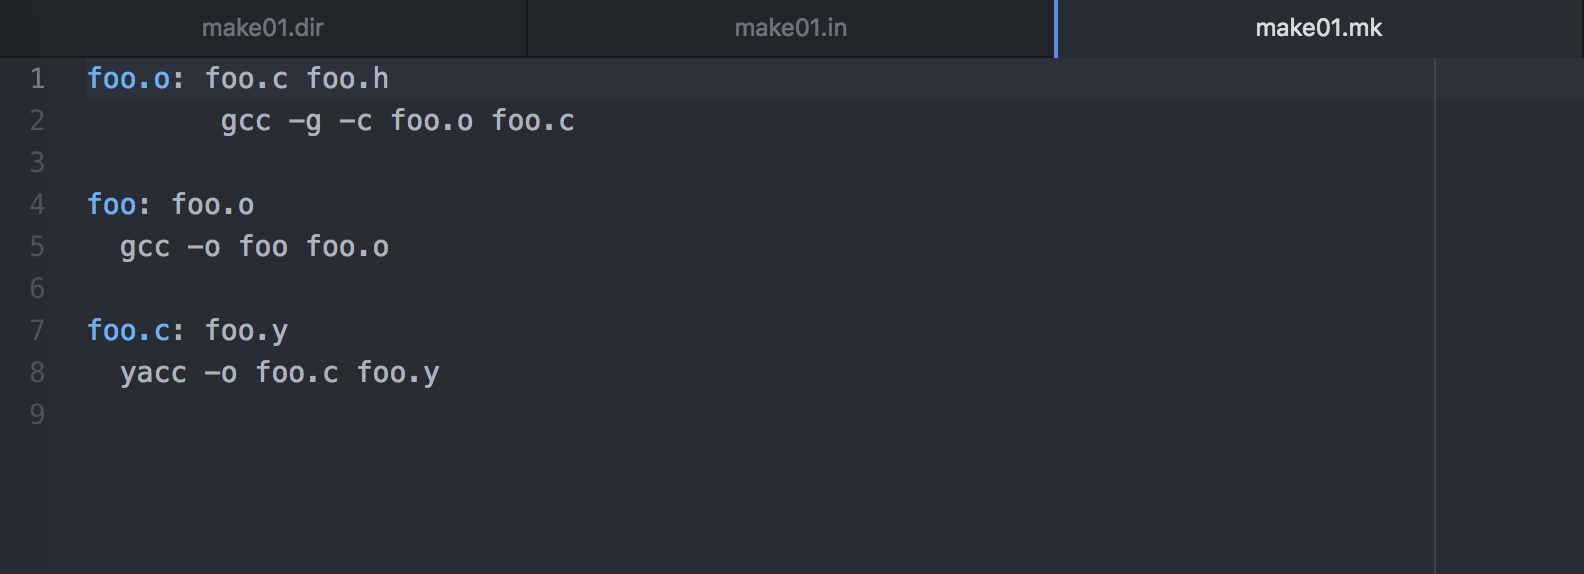 makefile exmaple with rules and dependencies example